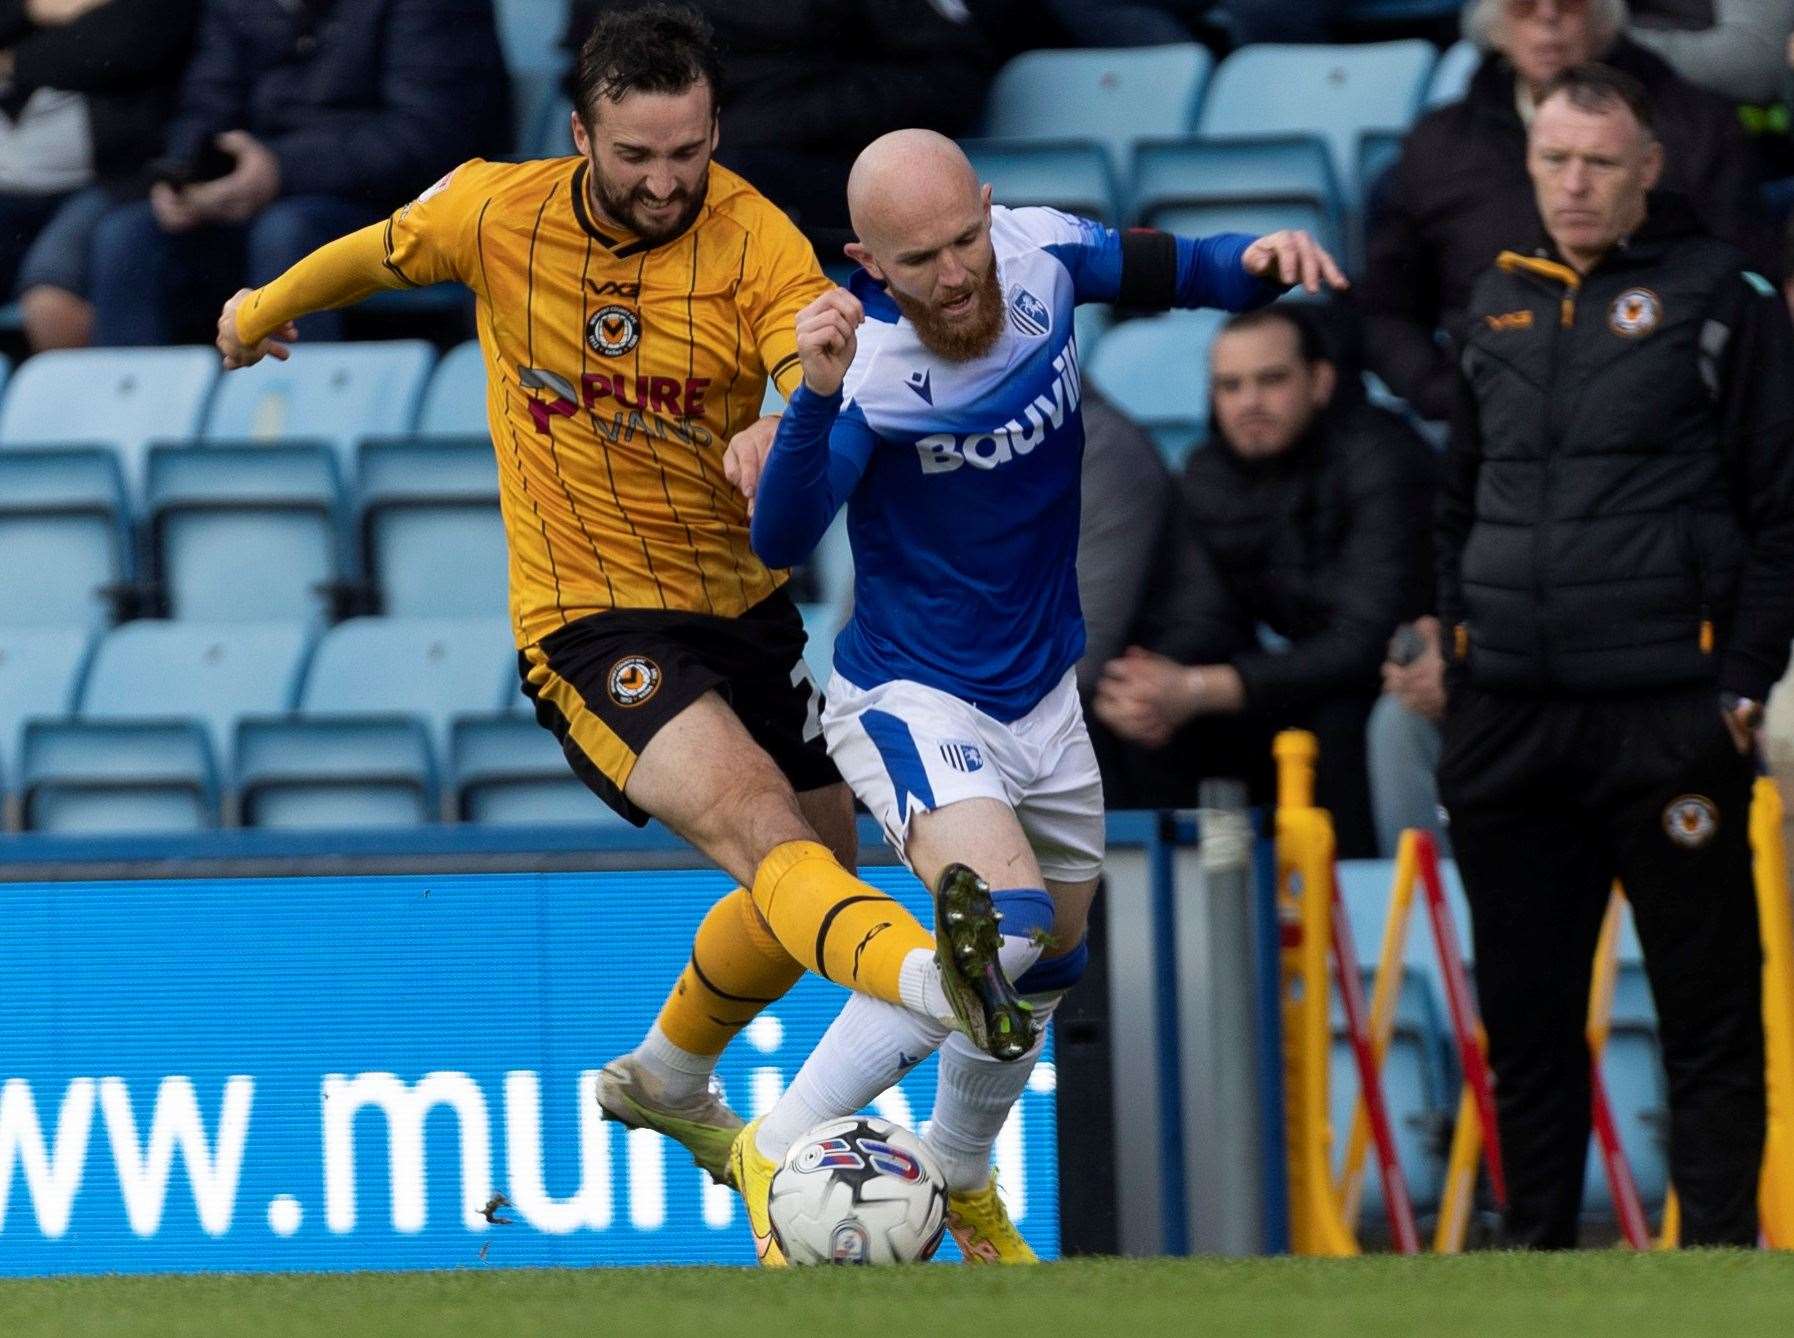 Jonny Williams in action for Gillingham in their last home league game against Newport County, a 2-0 defeat Picture: @Julian_KPI